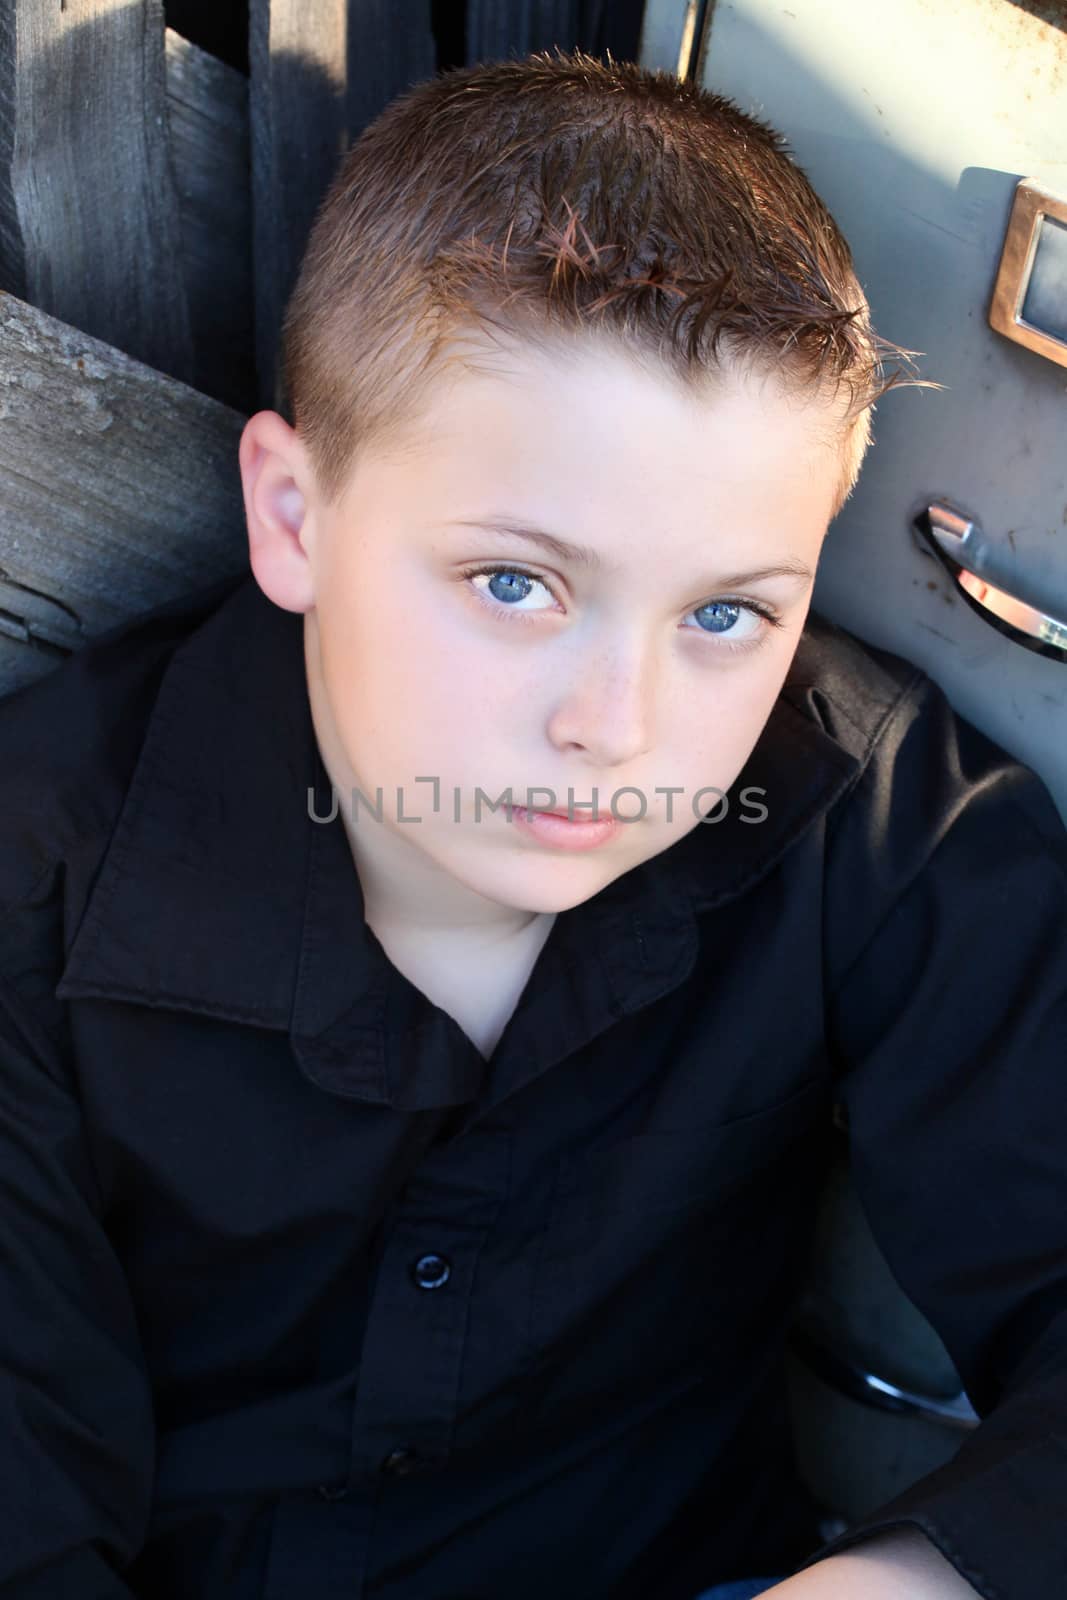 Young boy with deep blue eyes sitting against rustic background